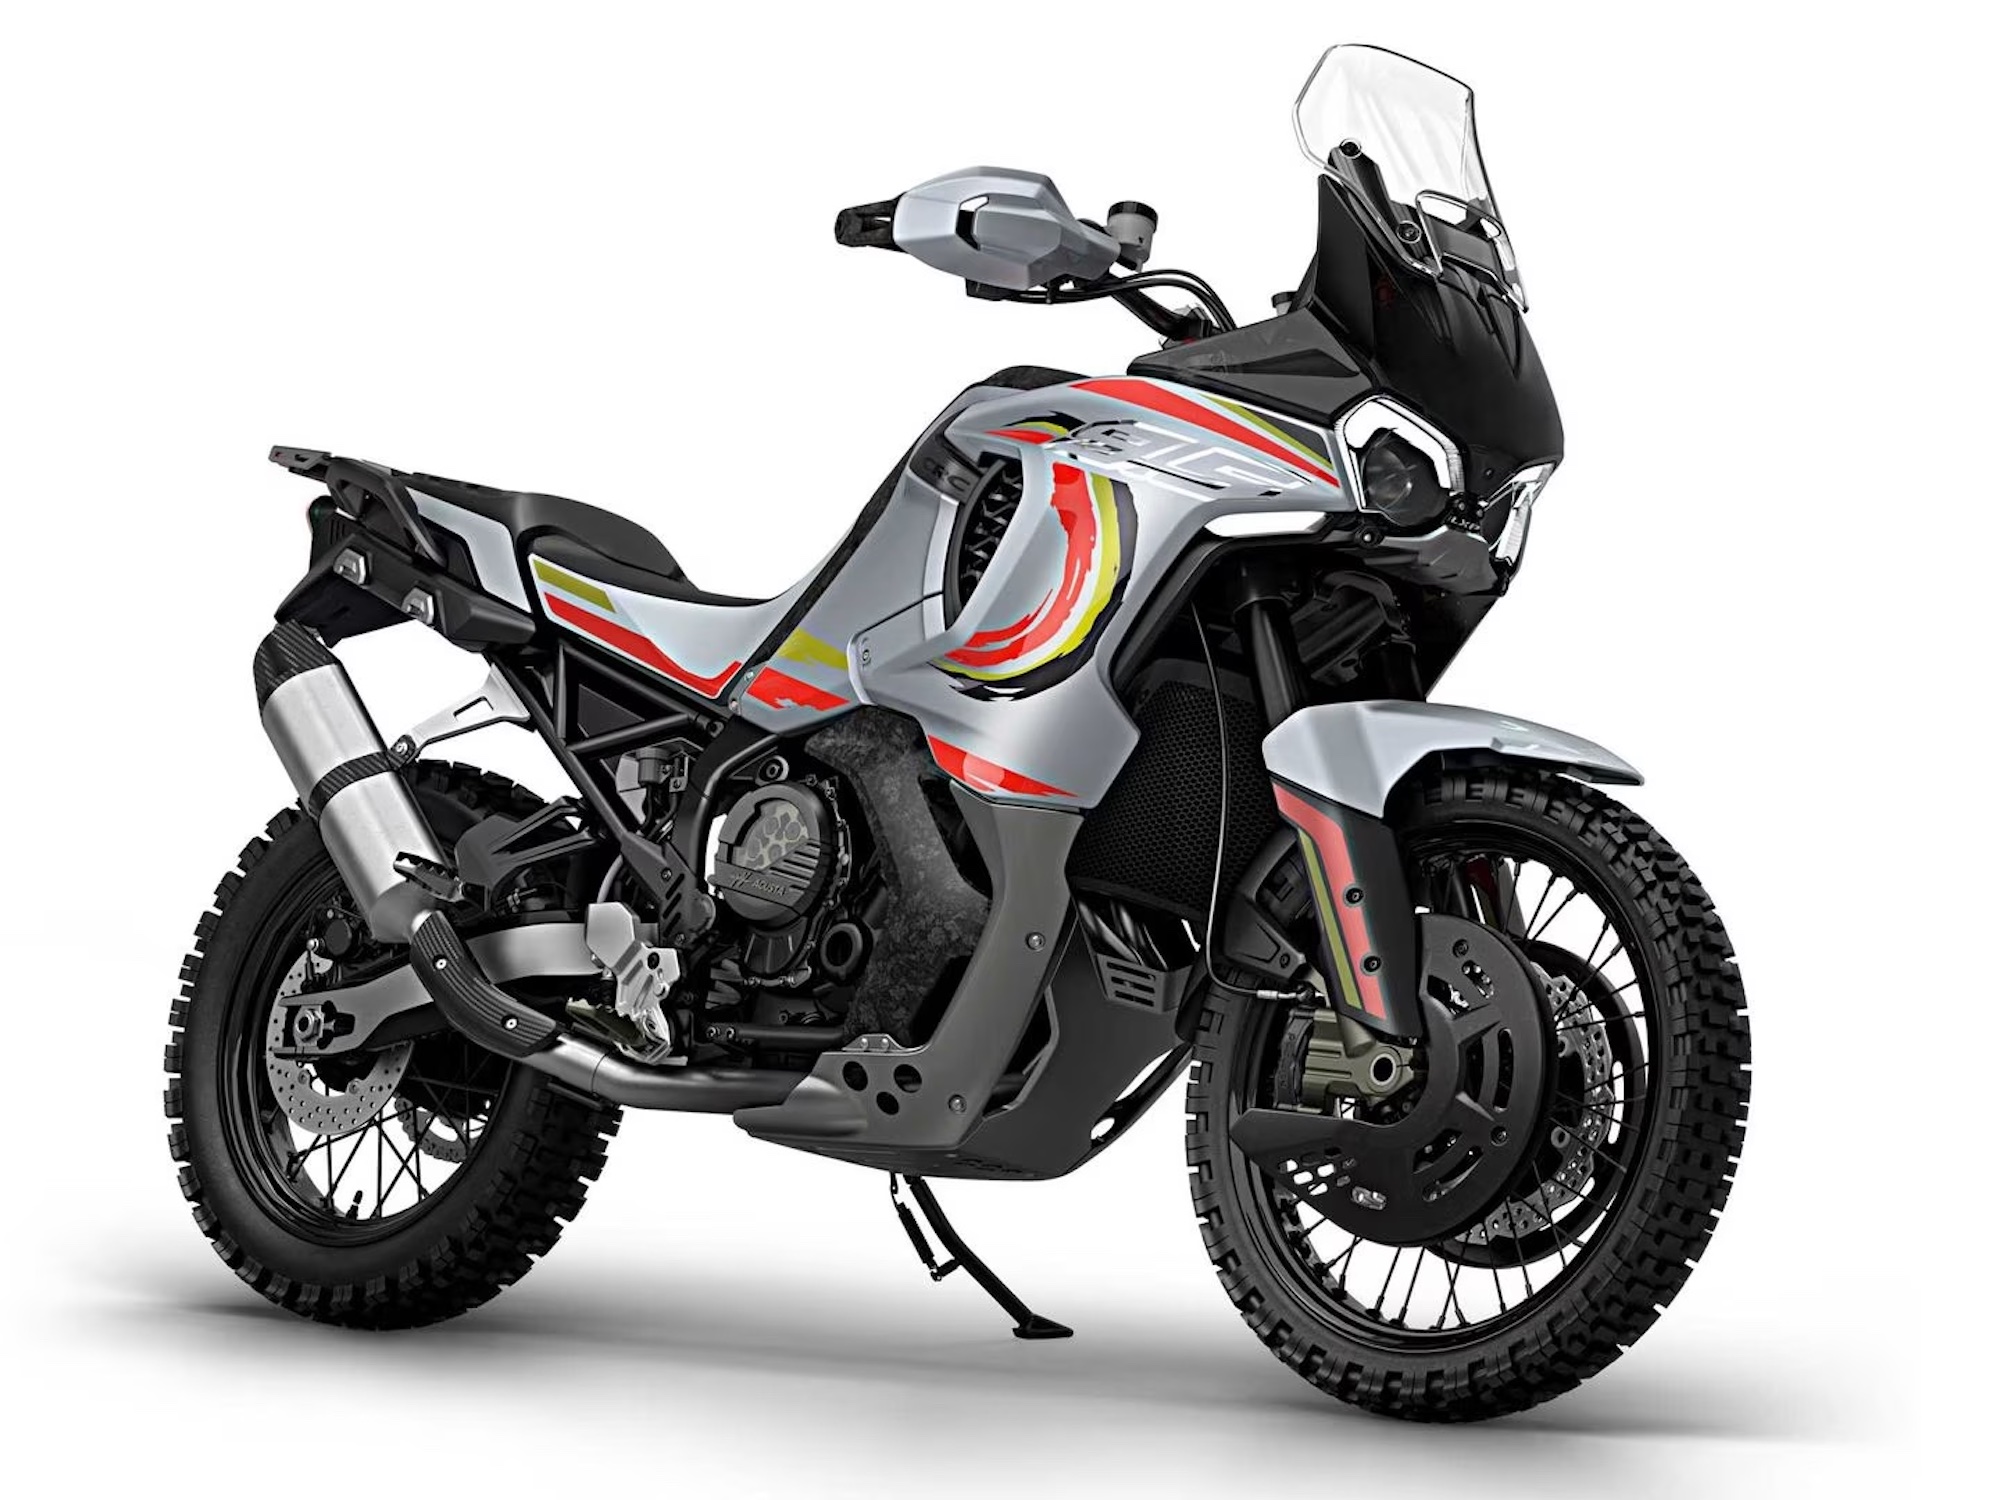 A view of MV Agusta's Lucky Explorer 9.5, which has been rebranded to Enduro Veloce. Media sourced from CycleWorld.